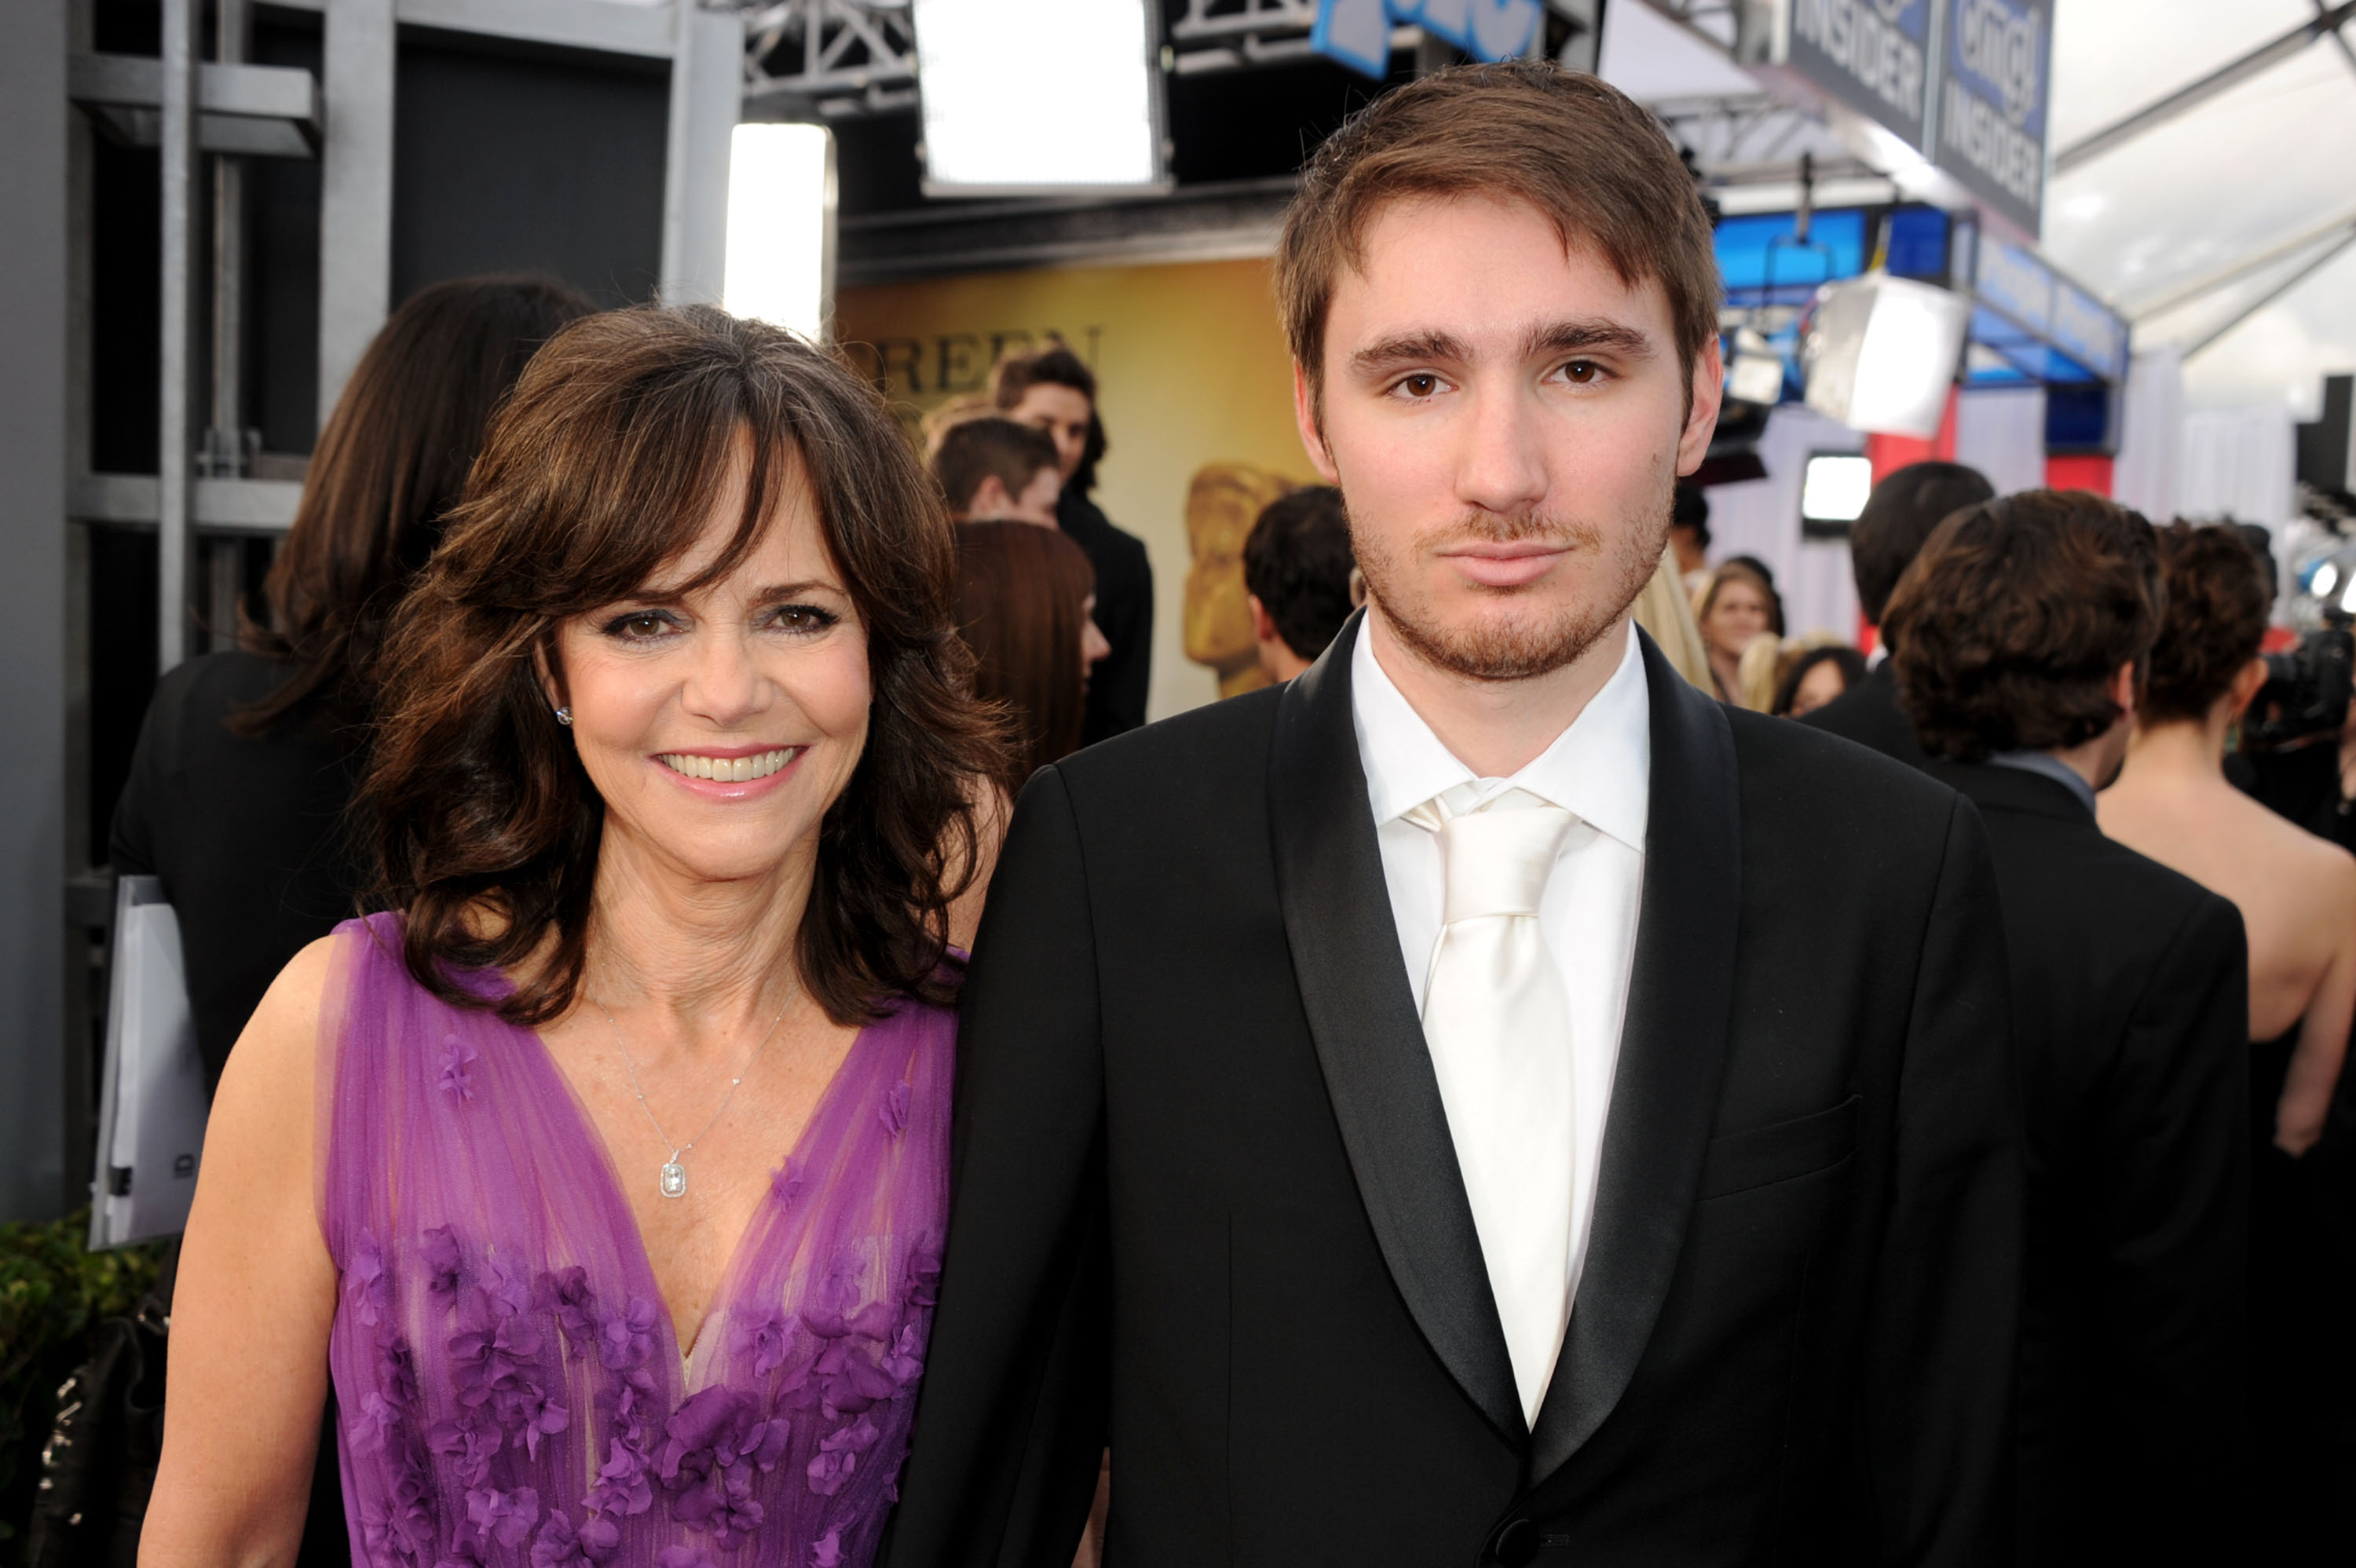 Sally Field and her son Samuel Greisman attend the 19th Annual Screen Actors Guild Awards at The Shrine Auditorium on January 27, 2013 in Los Angeles, California | Source: Getty Images